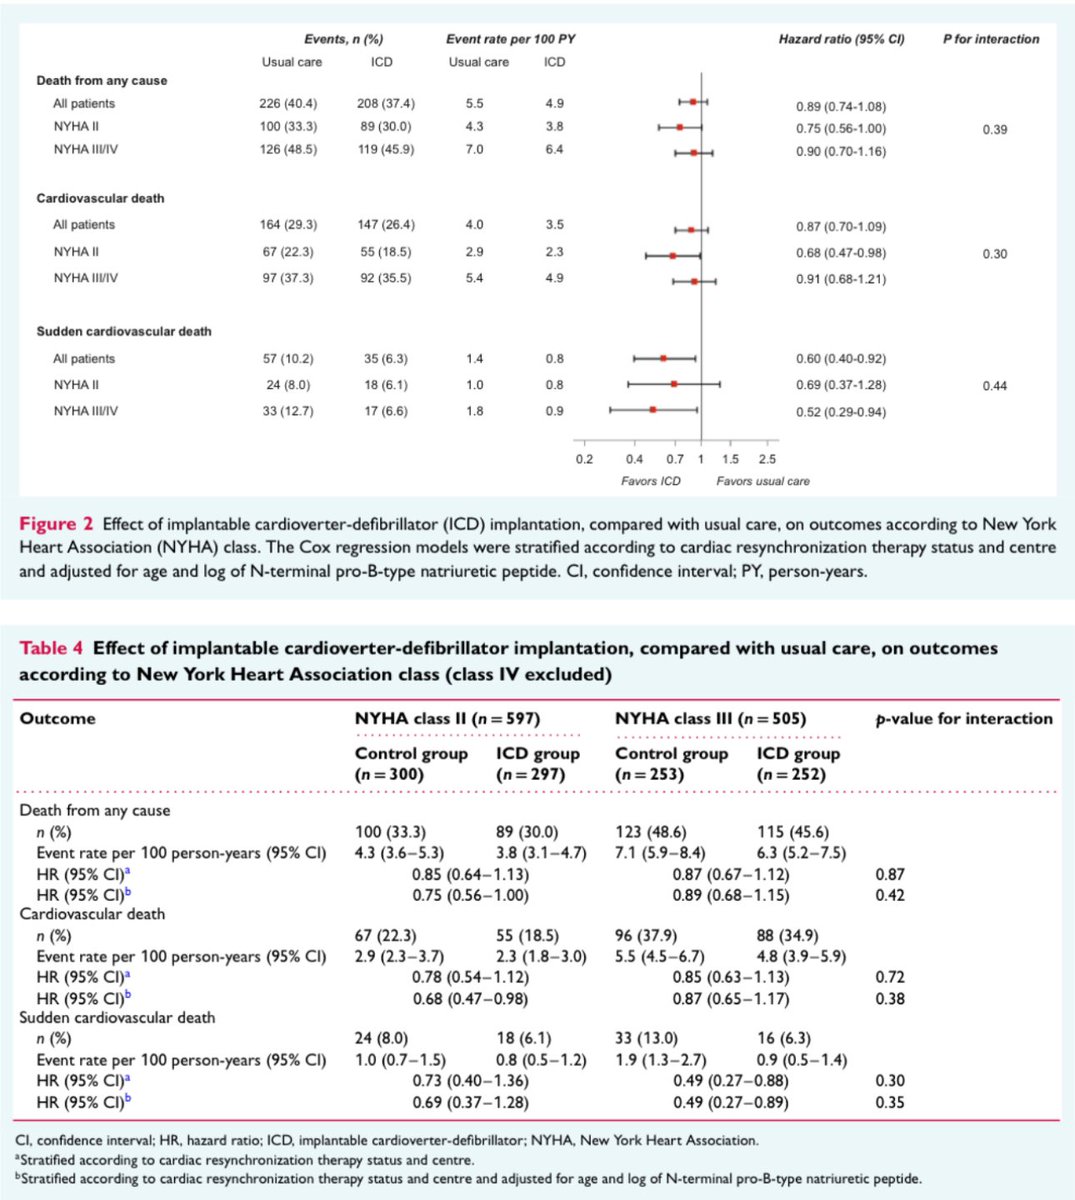 New findings from #DANISH trial in non-ischaemic #HFrEF patients 📍NYHA class III/IV associated with higher all-cause and CV mortality. 📍ICD implantation didn't reduce mortality rates regardless of #NYHA class. No modification of #ICD benefits by NYHA class…